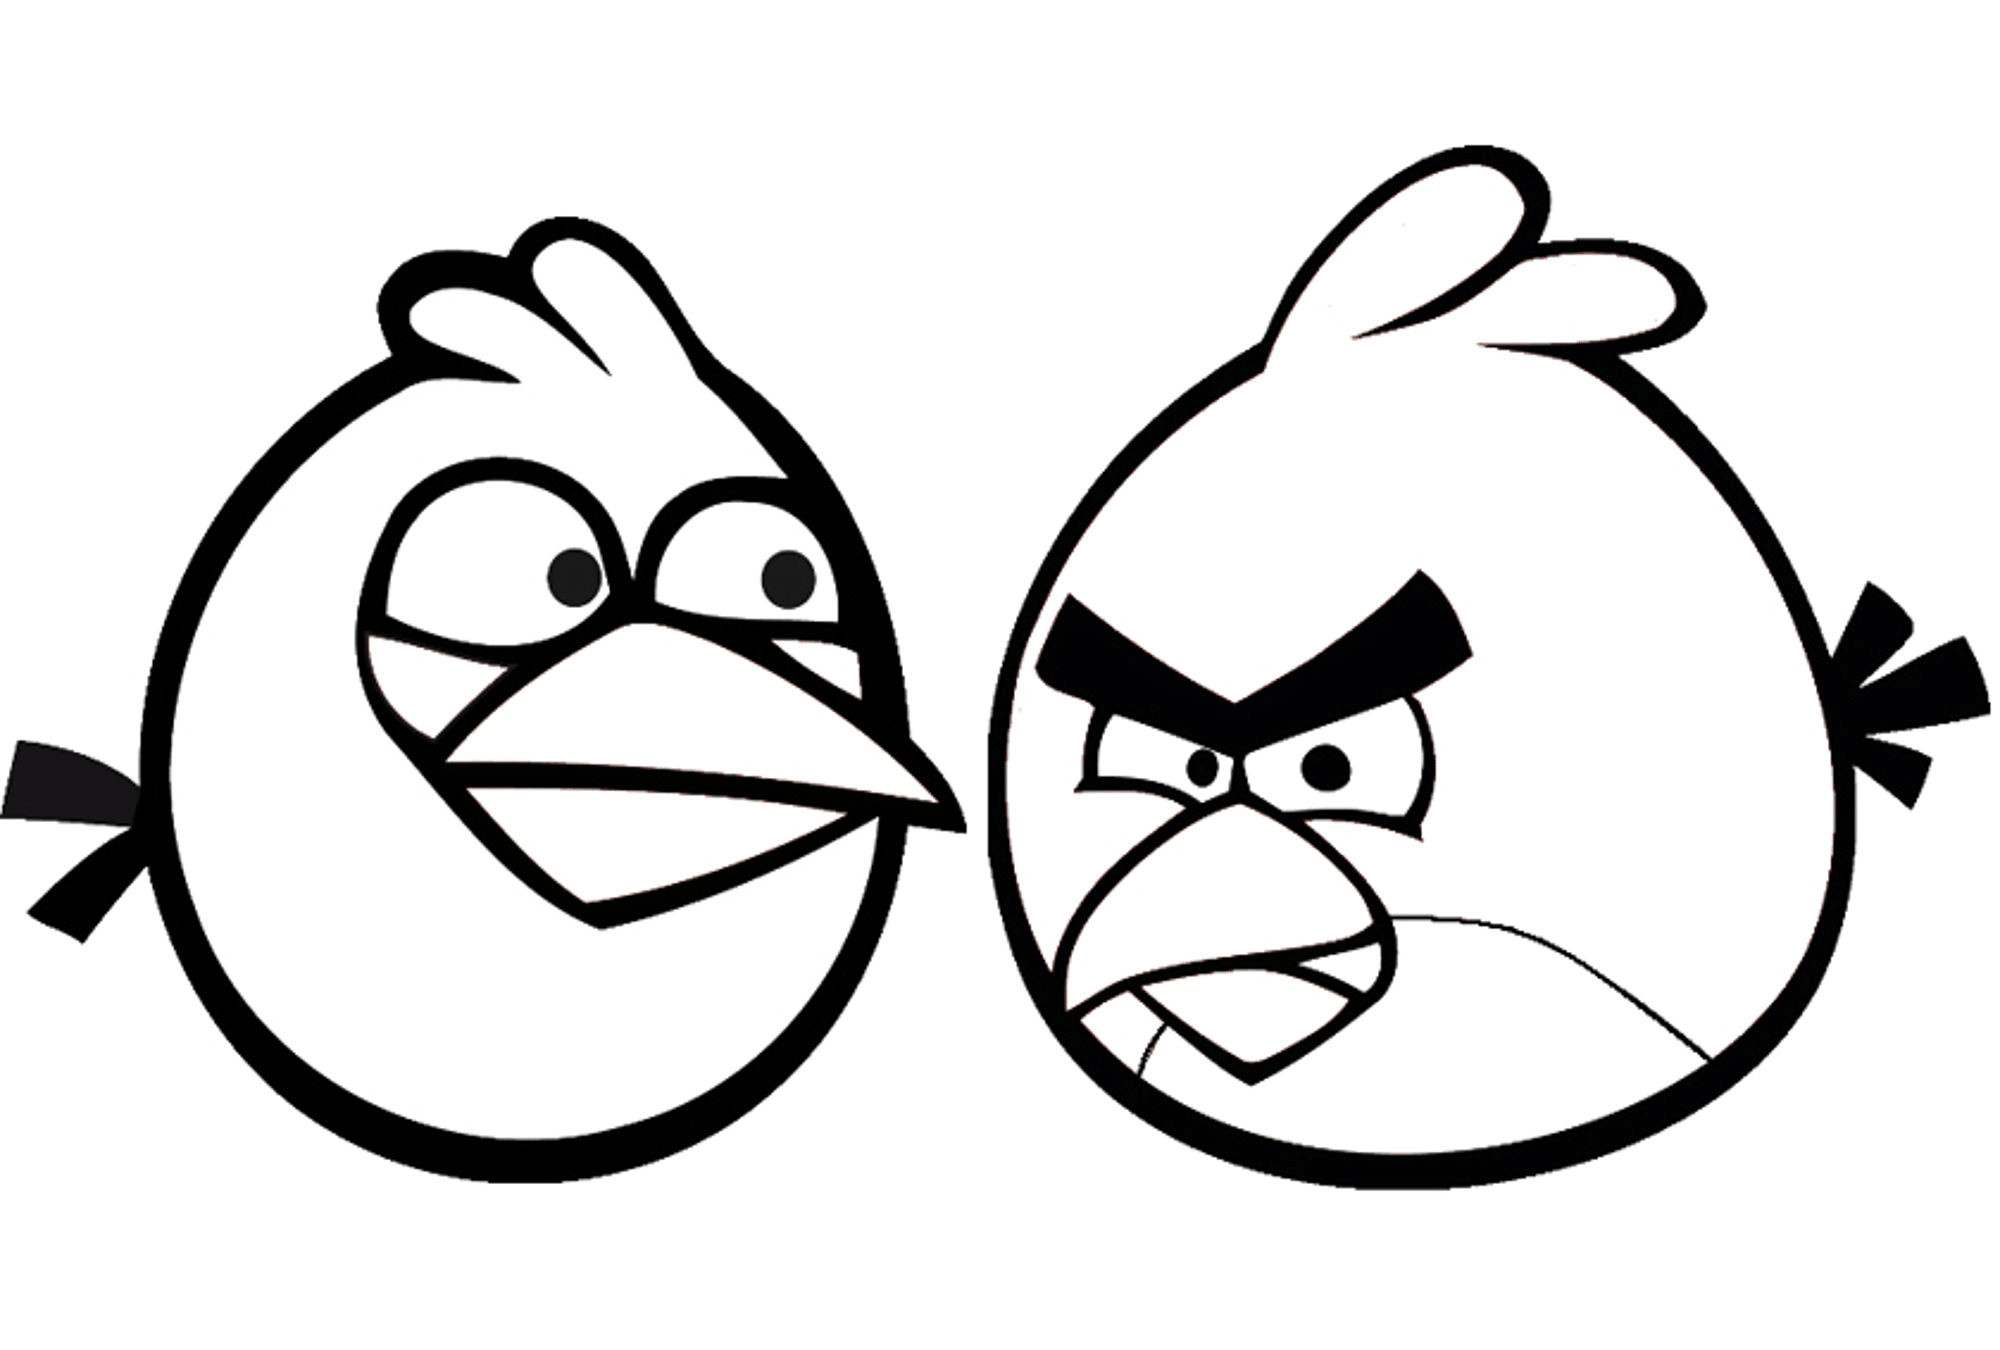 Angry Bird Printable Coloring Pages
 Angry Birds Coloring Pages for Your Small Kids